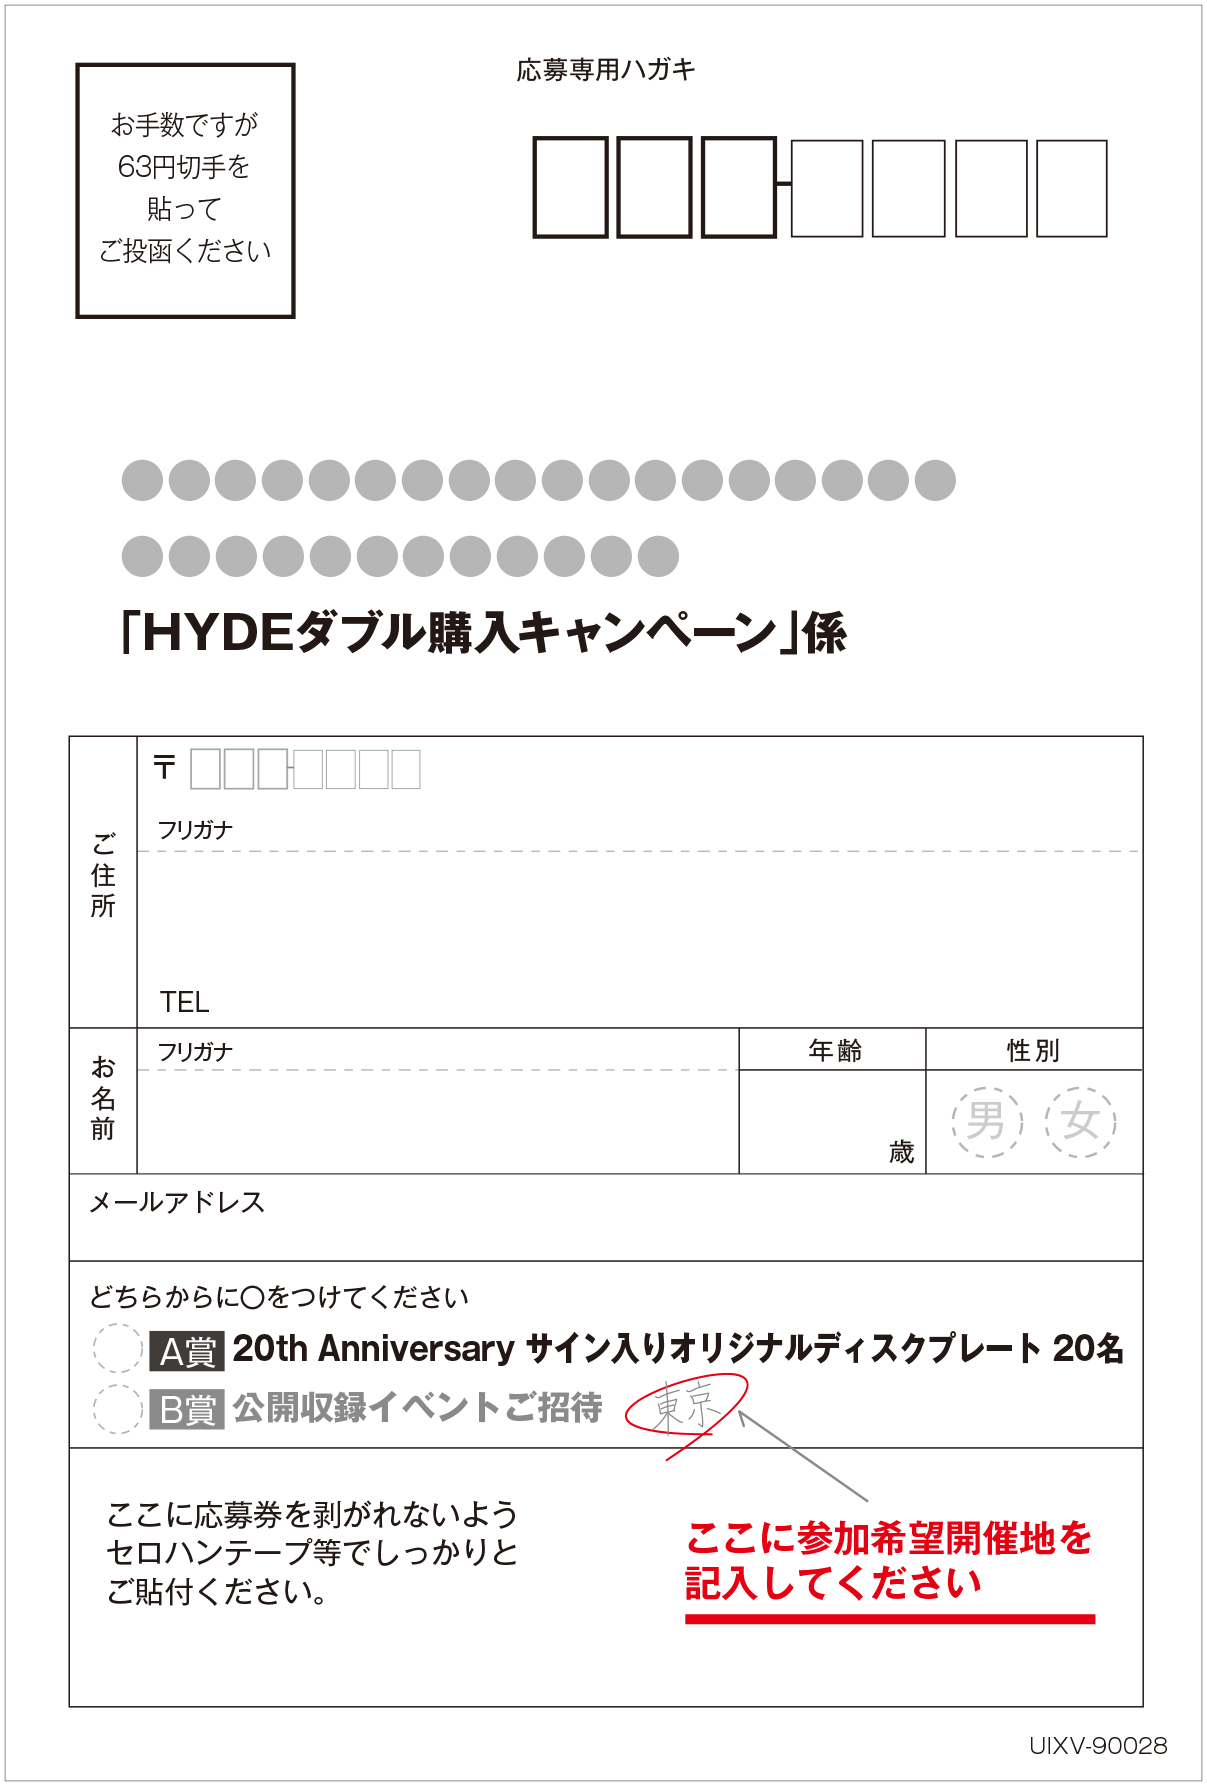 HYDE COMPLETE BOX ダブル購入キャンペーン 応募ハガキ 応募券 最大15%OFFクーポン BOX